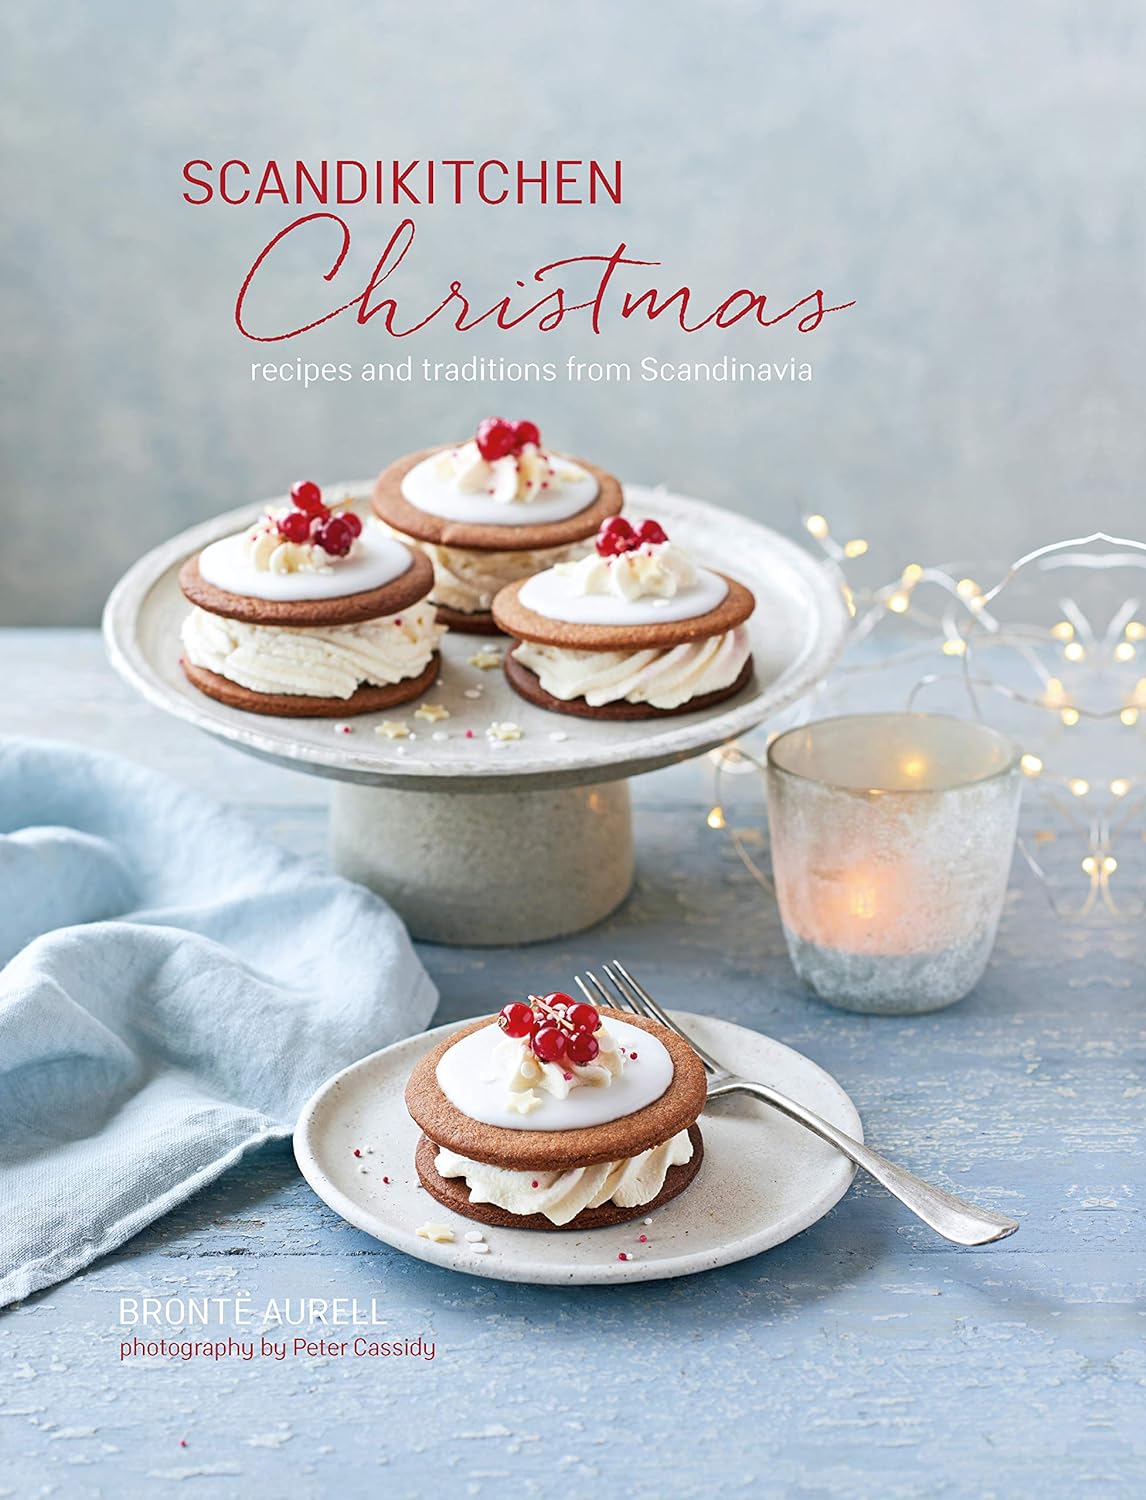 Book: ScandiKitchen Christmas: Recipes and traditions from Scandinavia